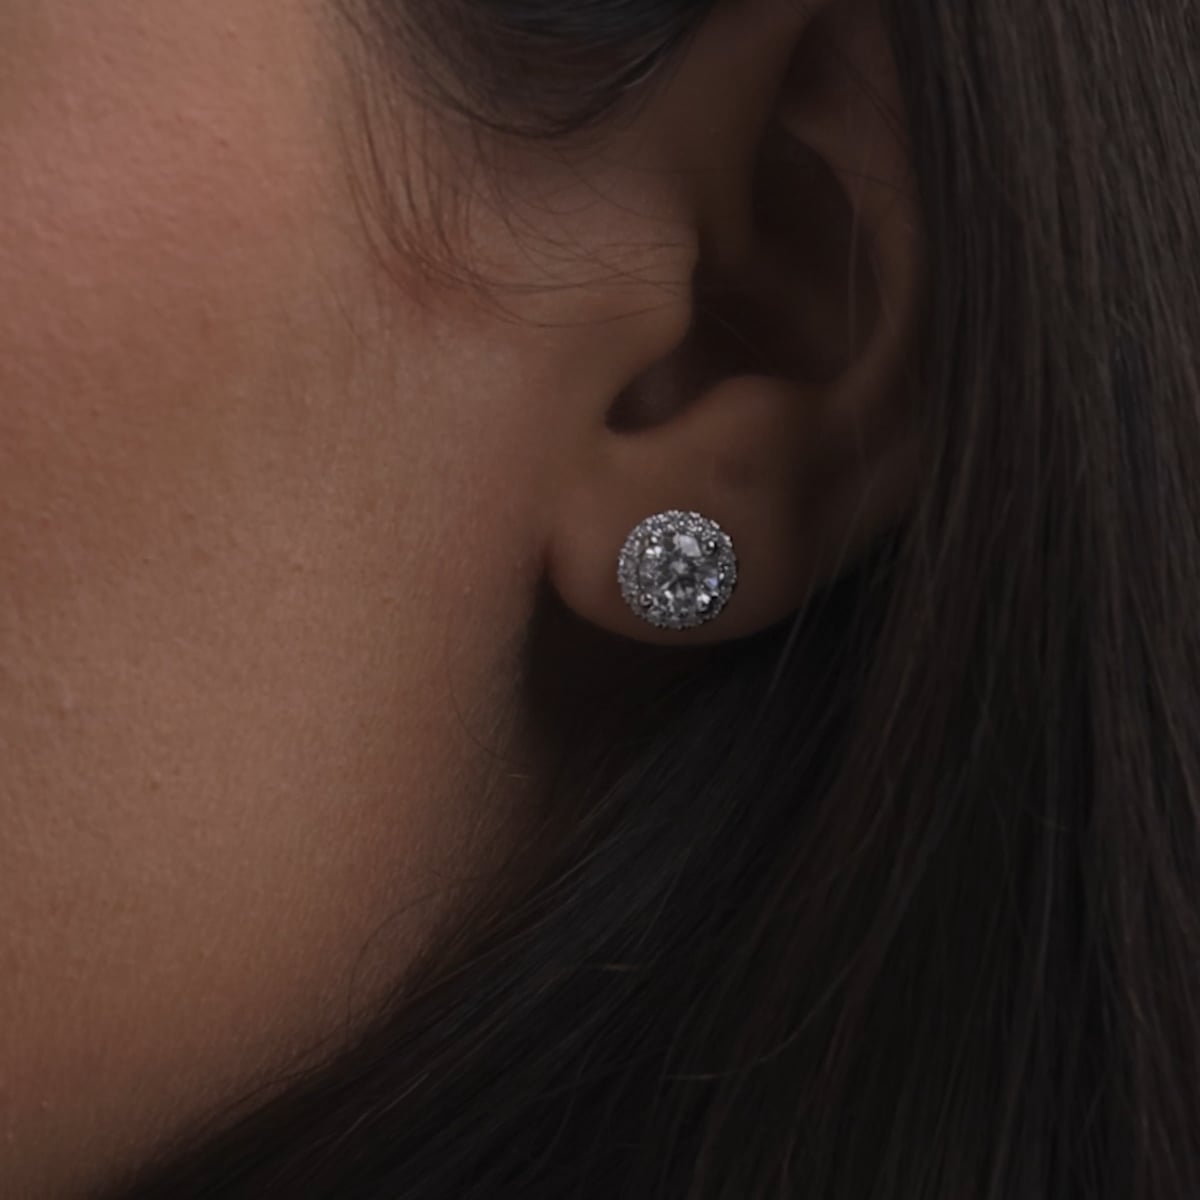 product video for 1 7/8 ctw Round Lab Grown Diamond Halo Certified Stud Earrings